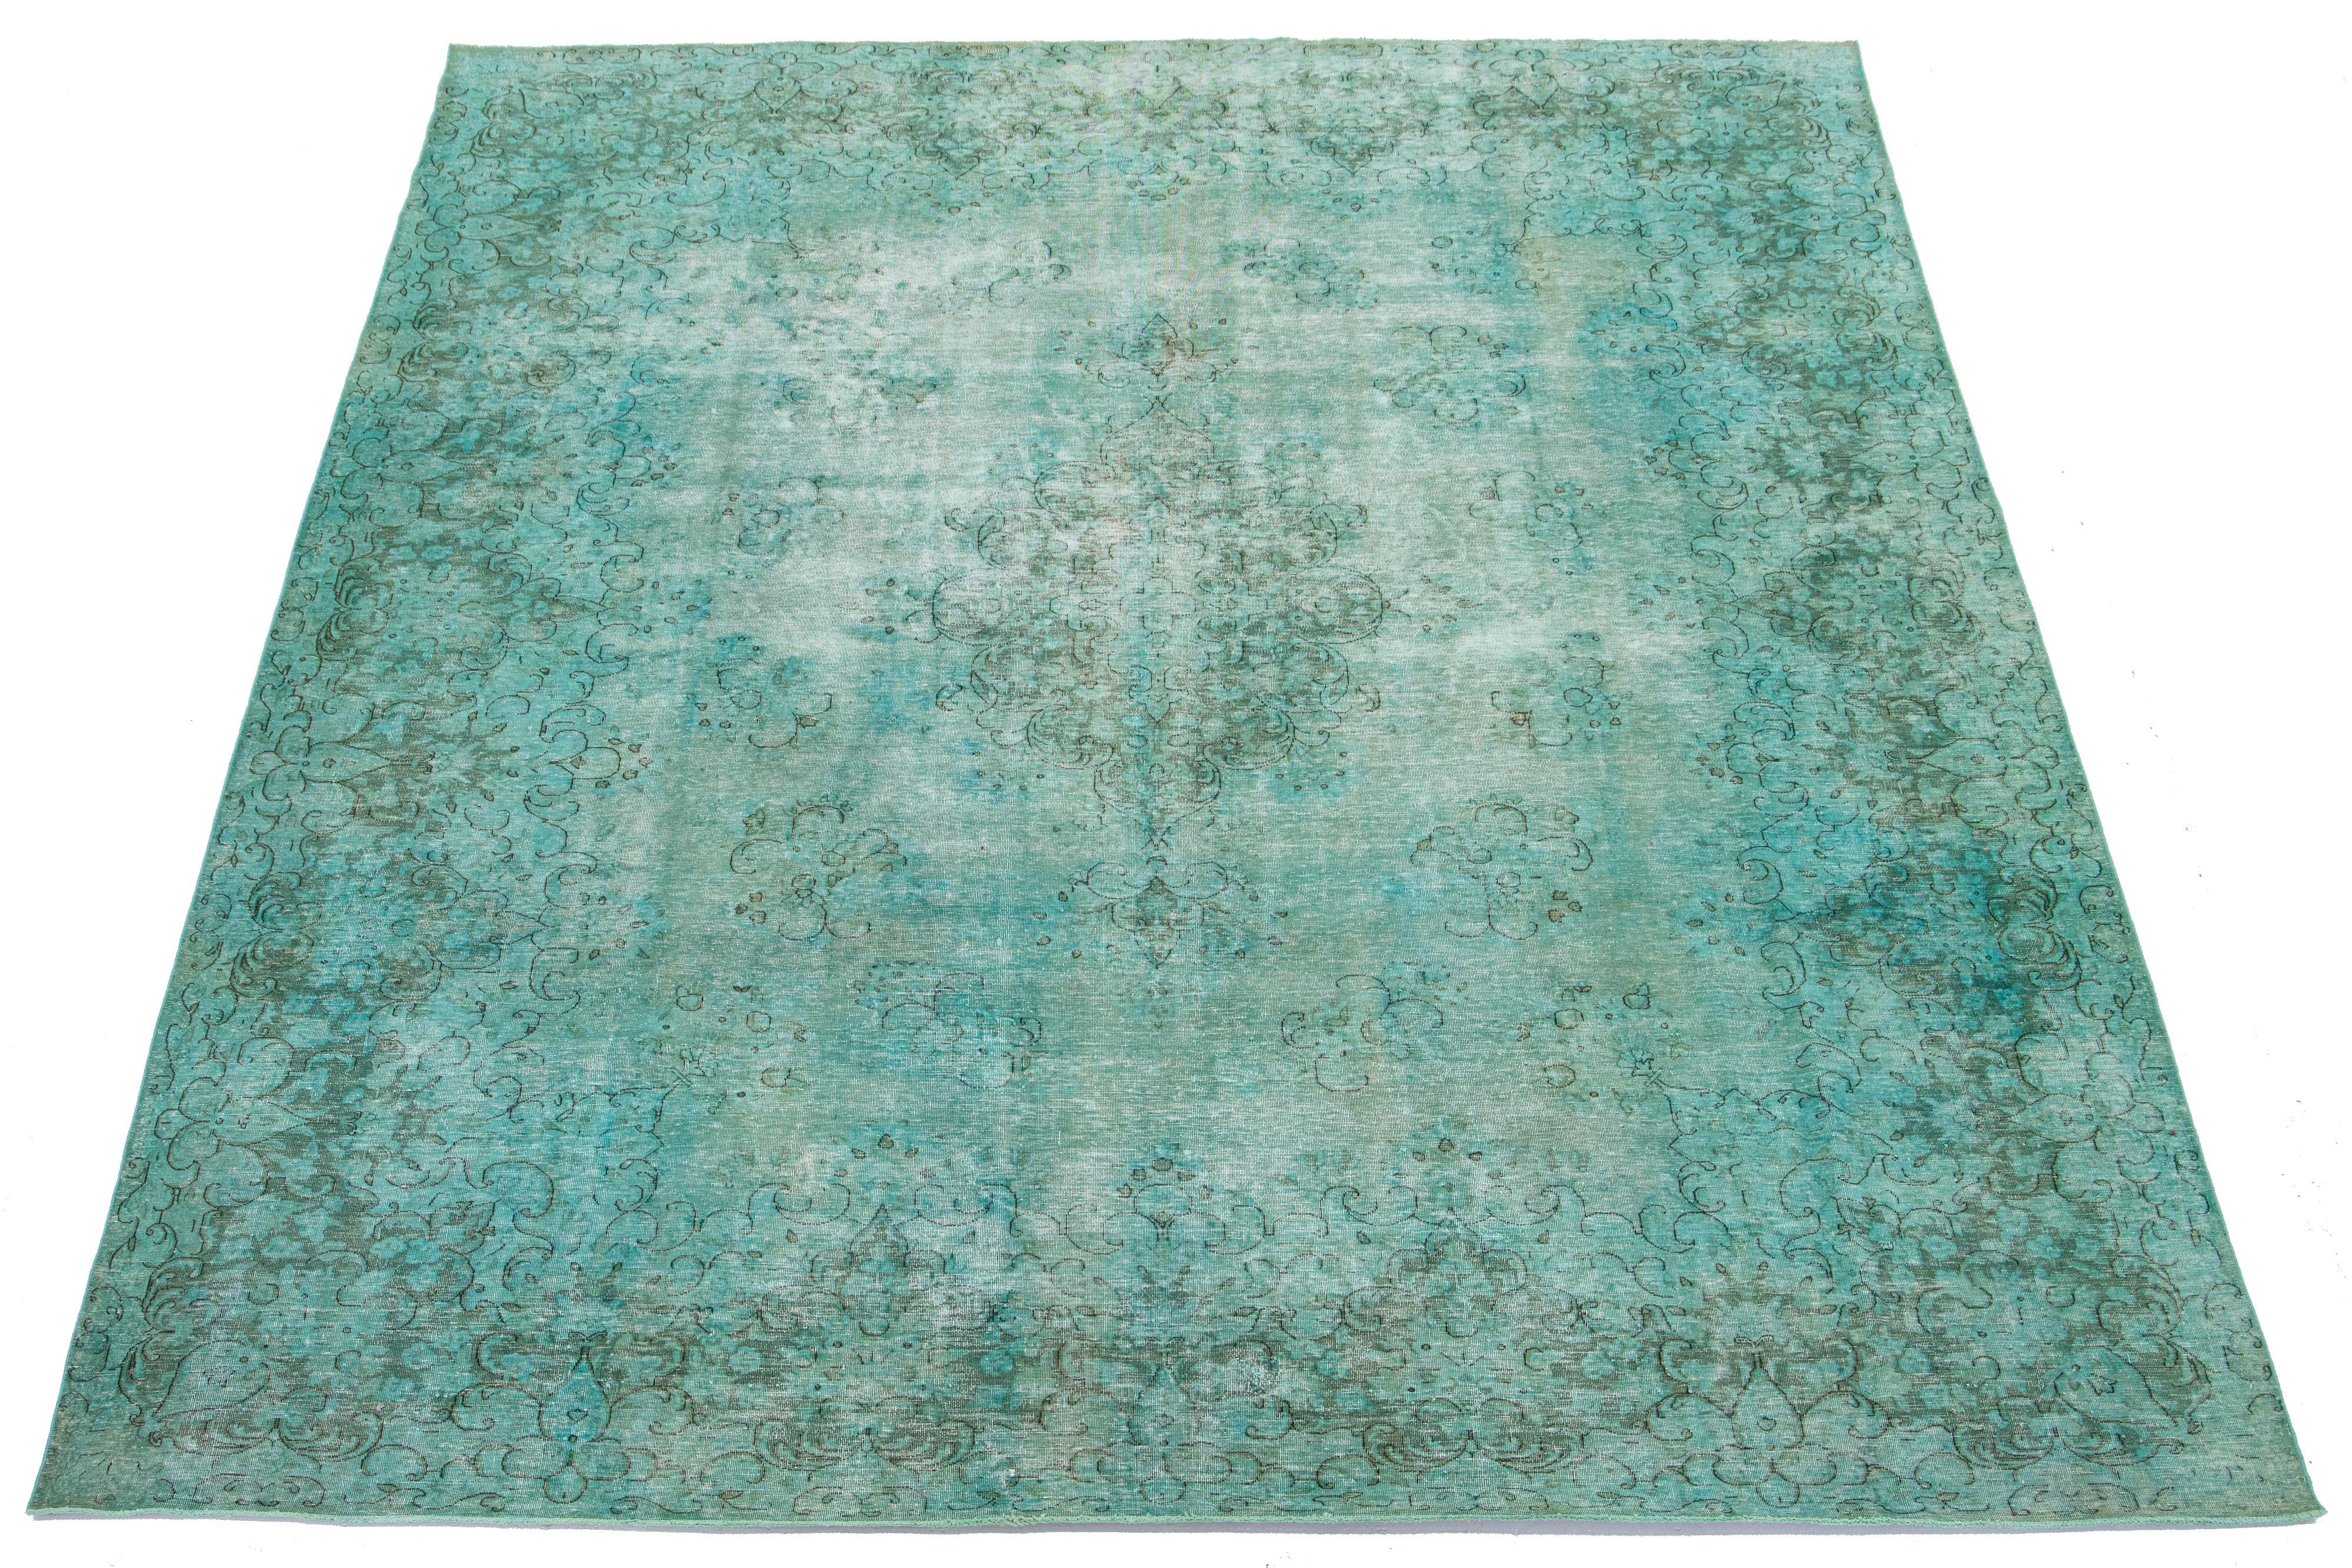 This is an antique hand-knotted wool Persian rug with a light green field. It features a medallion floral design with gray accents.

This rug measures 9'11'' x 13'2